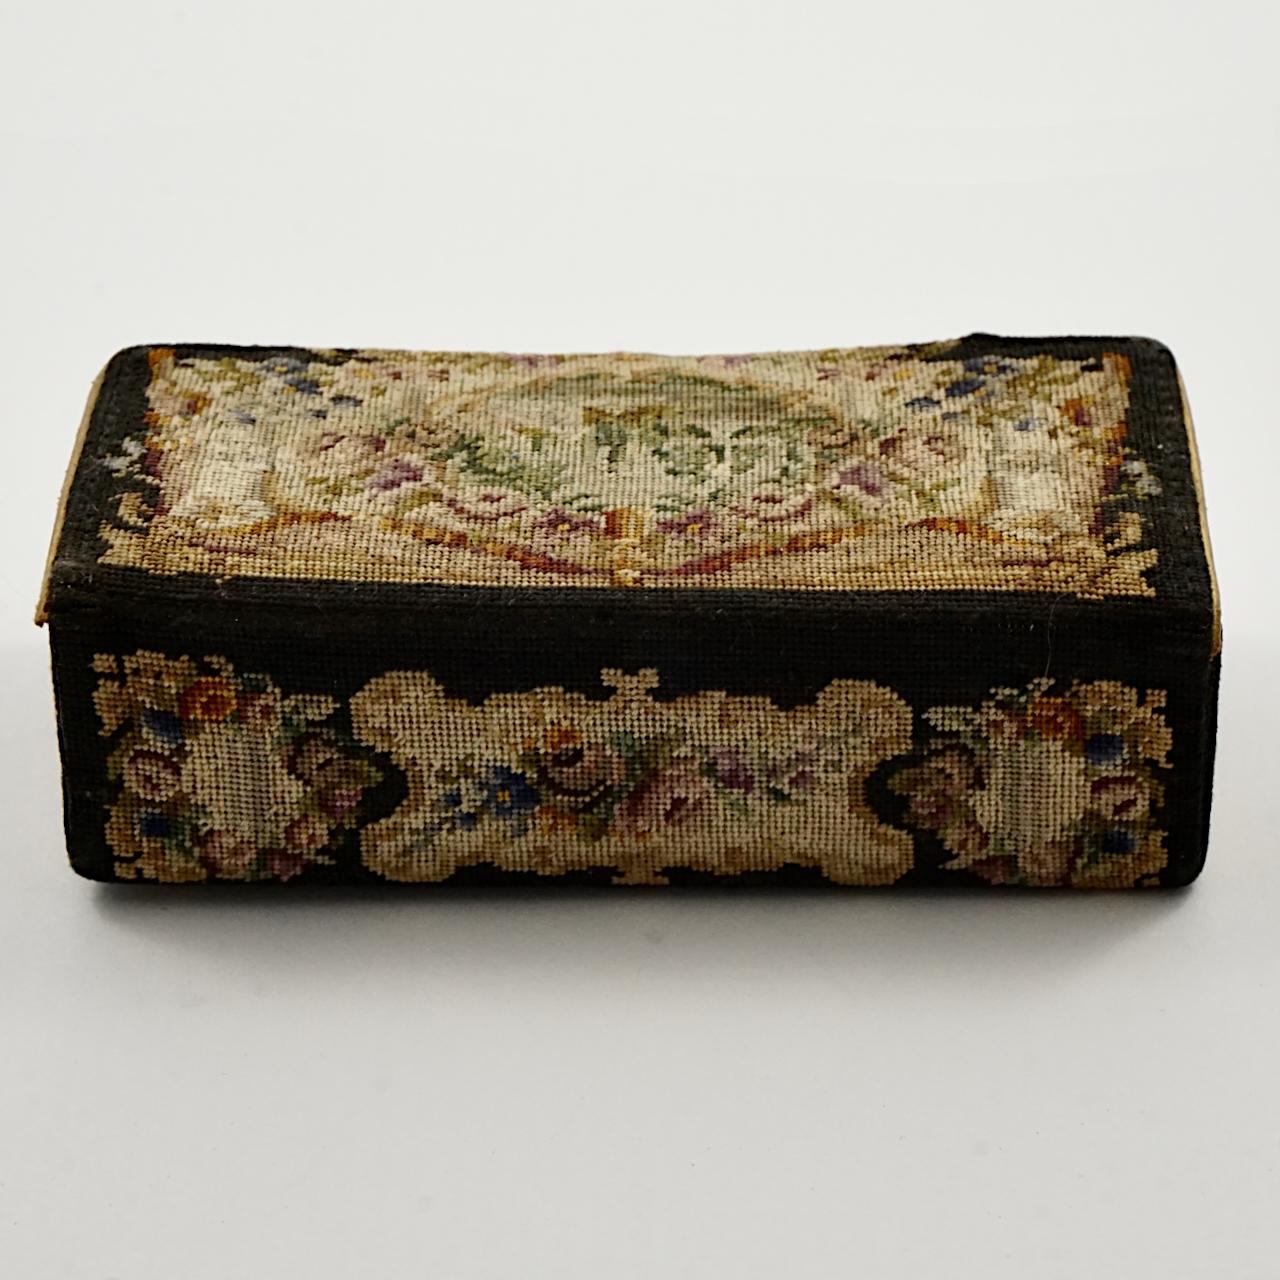 Petit Point Opera Glasses in a Petit Point Case with Gold Leather Moiré Lining 4